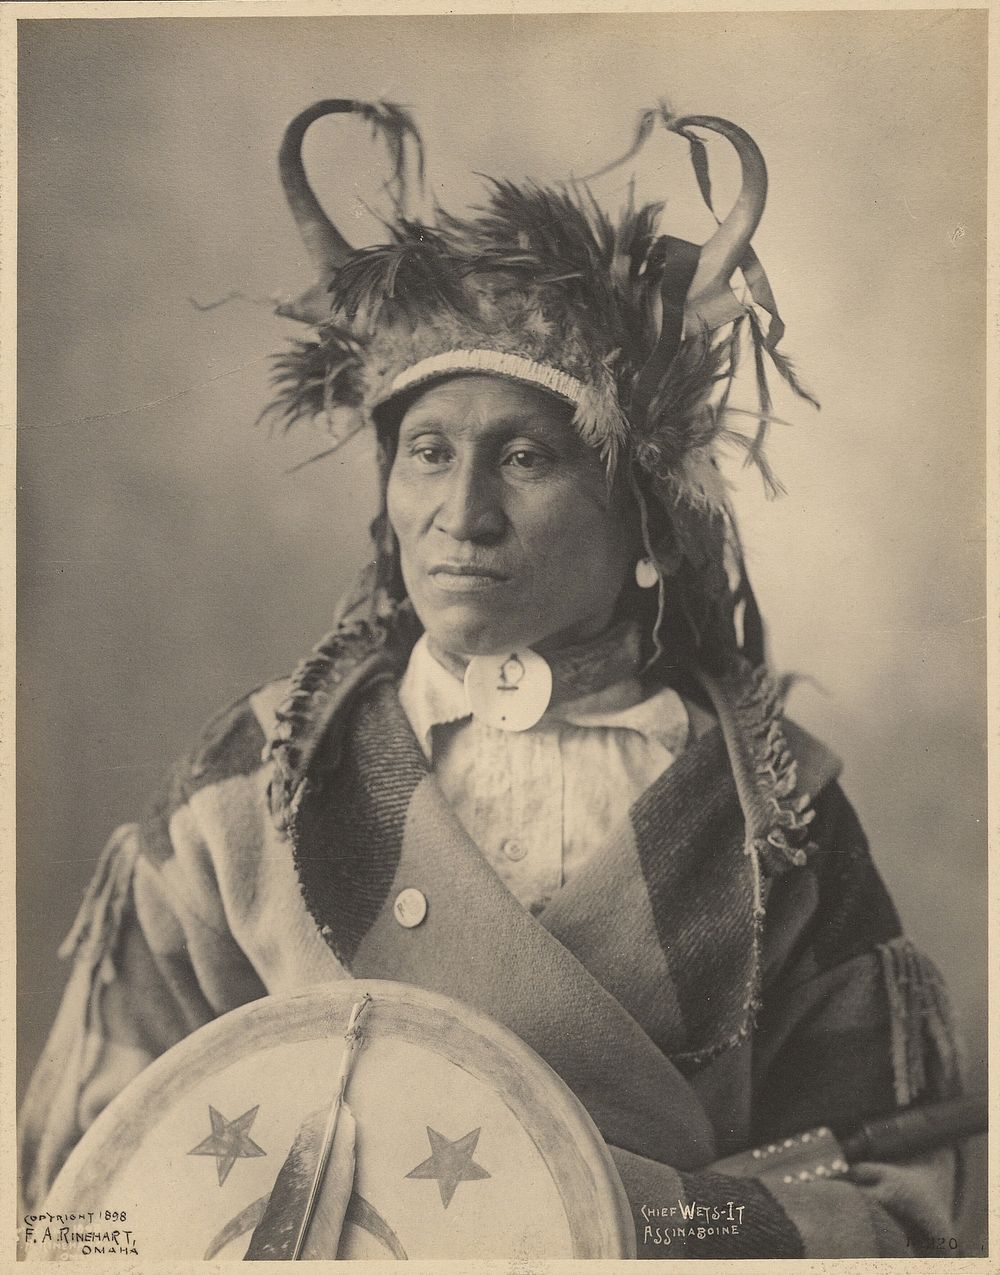 Chief Wets-It, Assiniboines by Adolph F Muhr and Frank A Rinehart